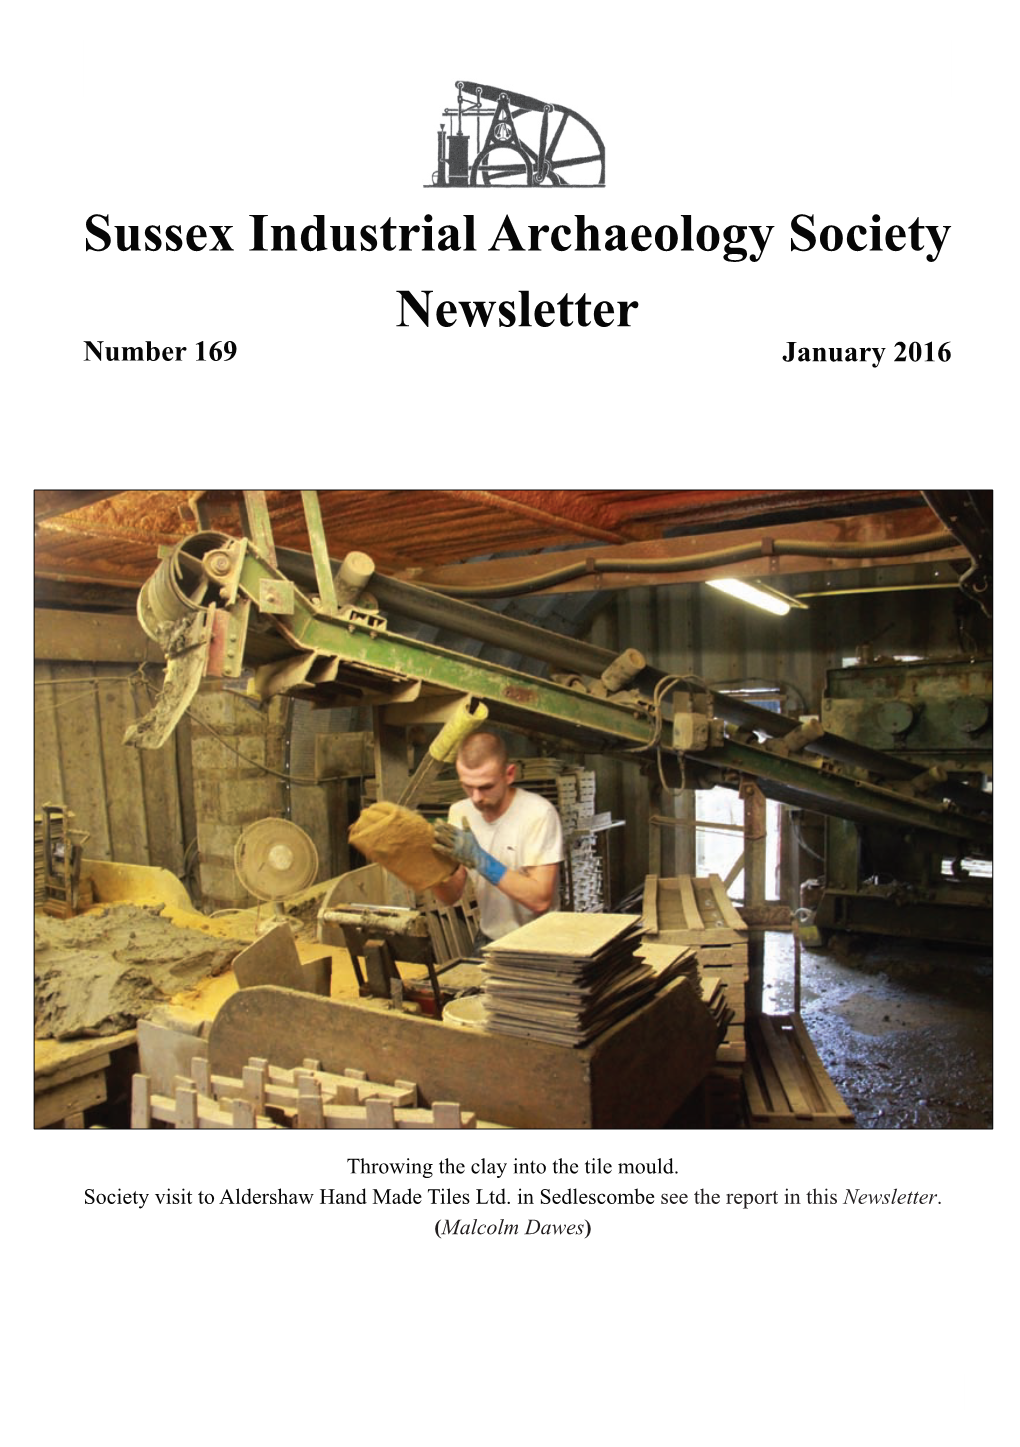 Sussex Industrial Archaeology Society Newsletter Number 169 January 2016